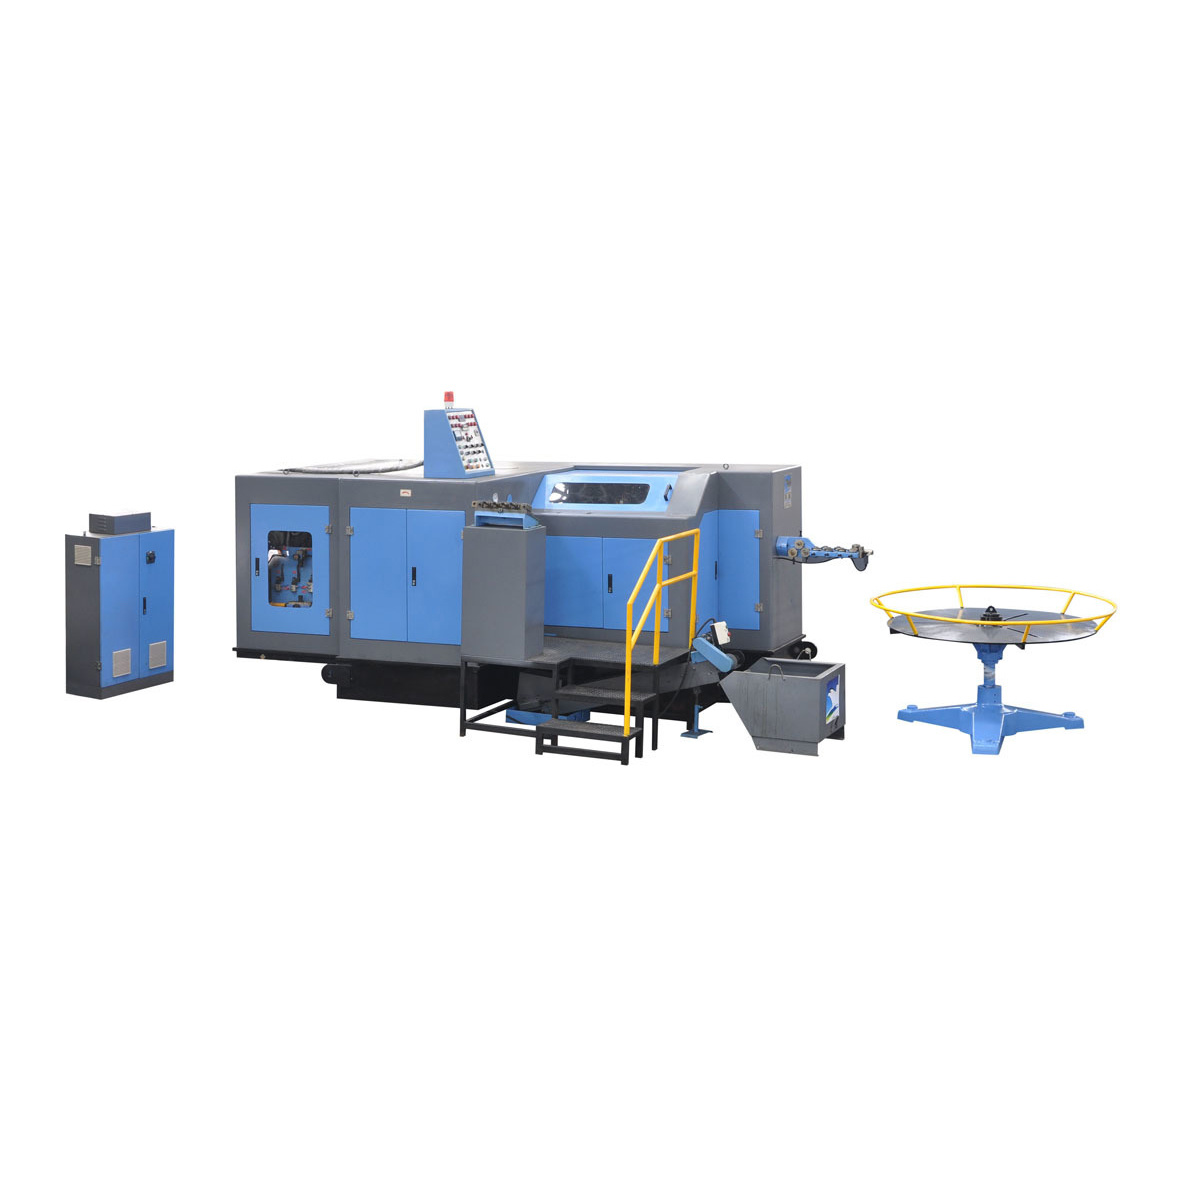 DBF-84S multi-station cold heading forming machine